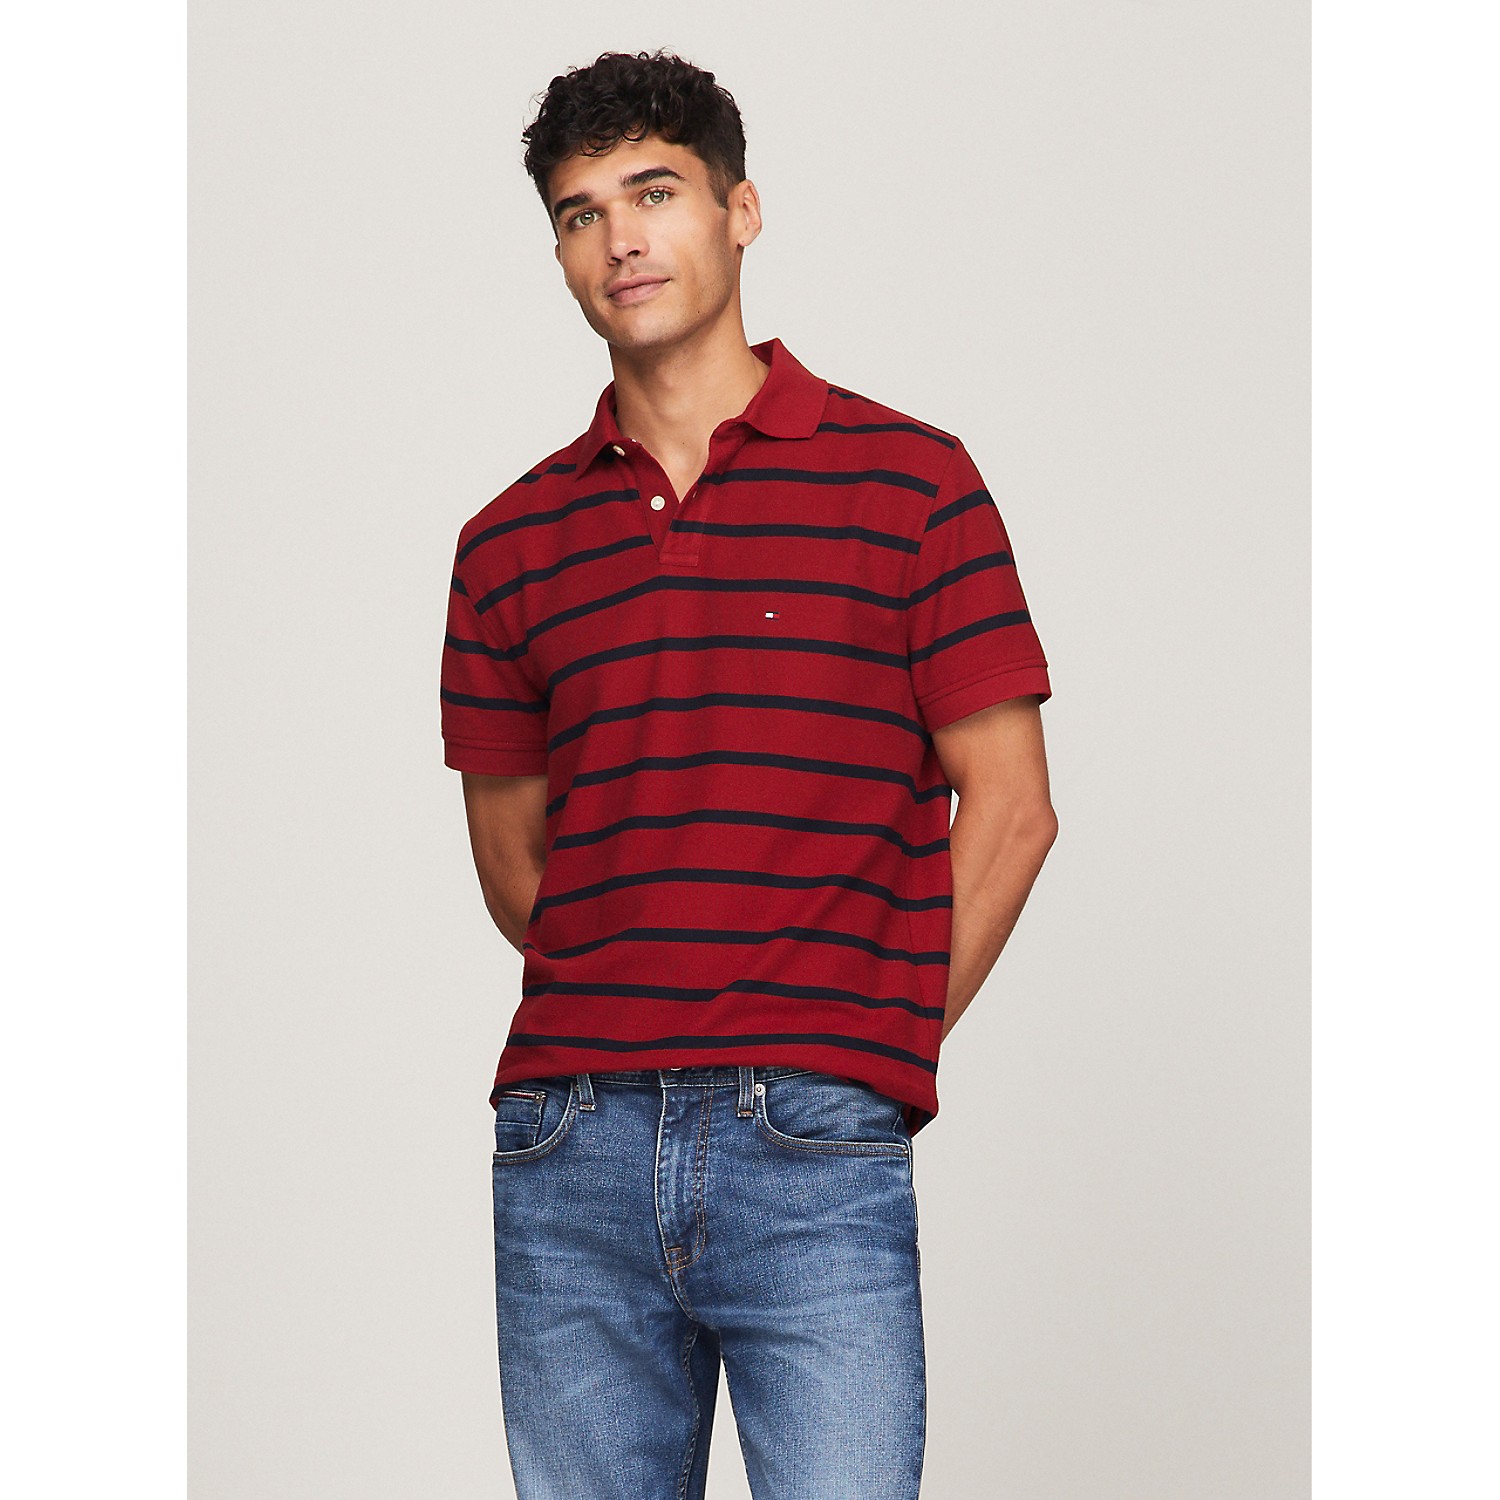 TOMMY HILFIGER Regular Fit Stripe Wicking Polo